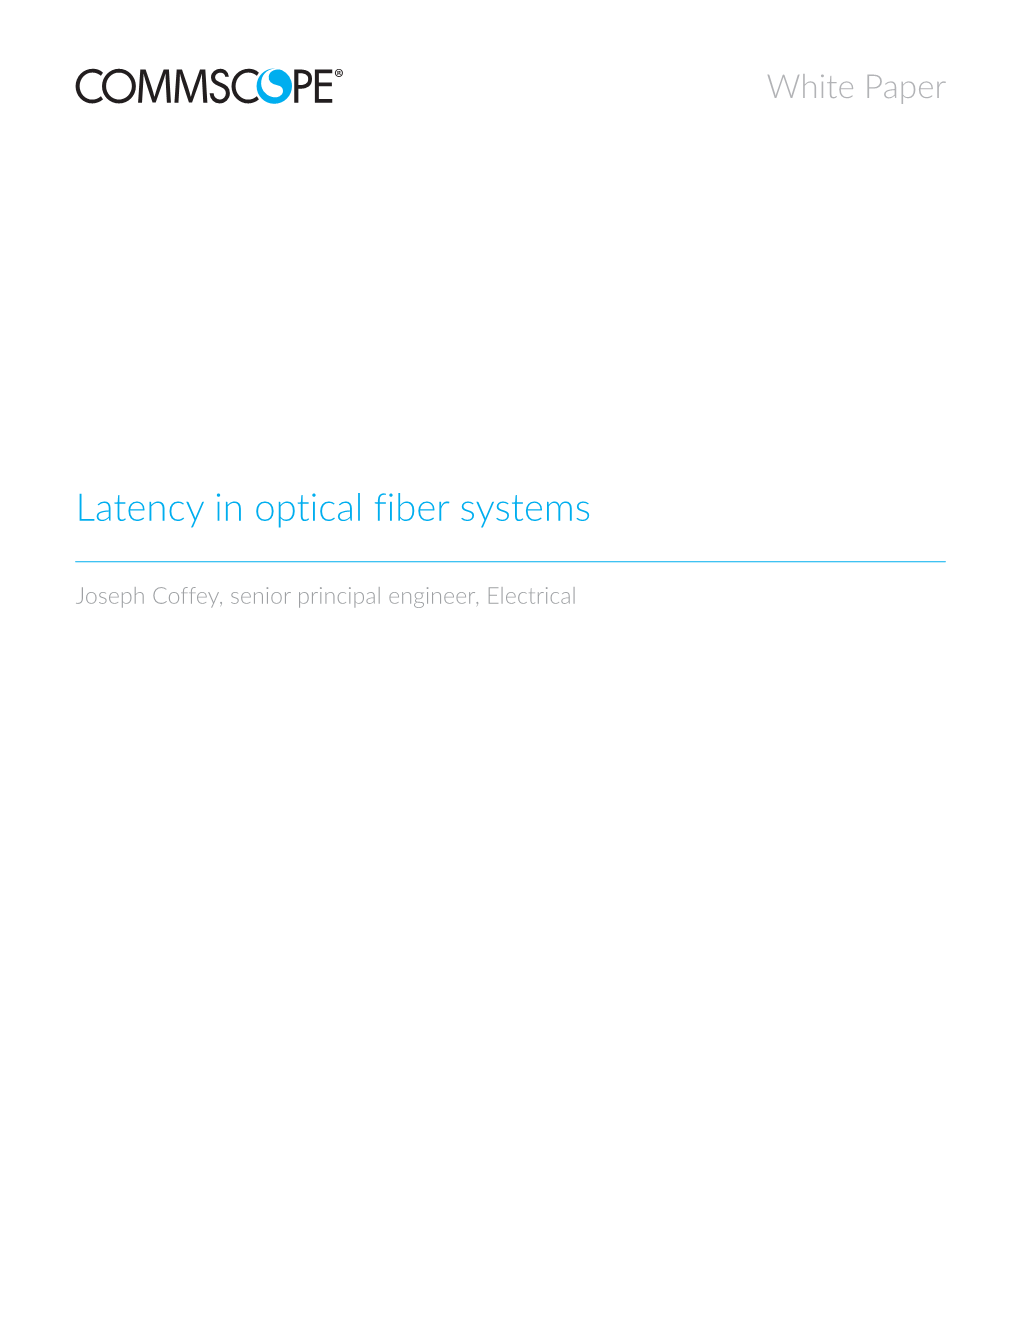 Latency in Optical Fiber Systems